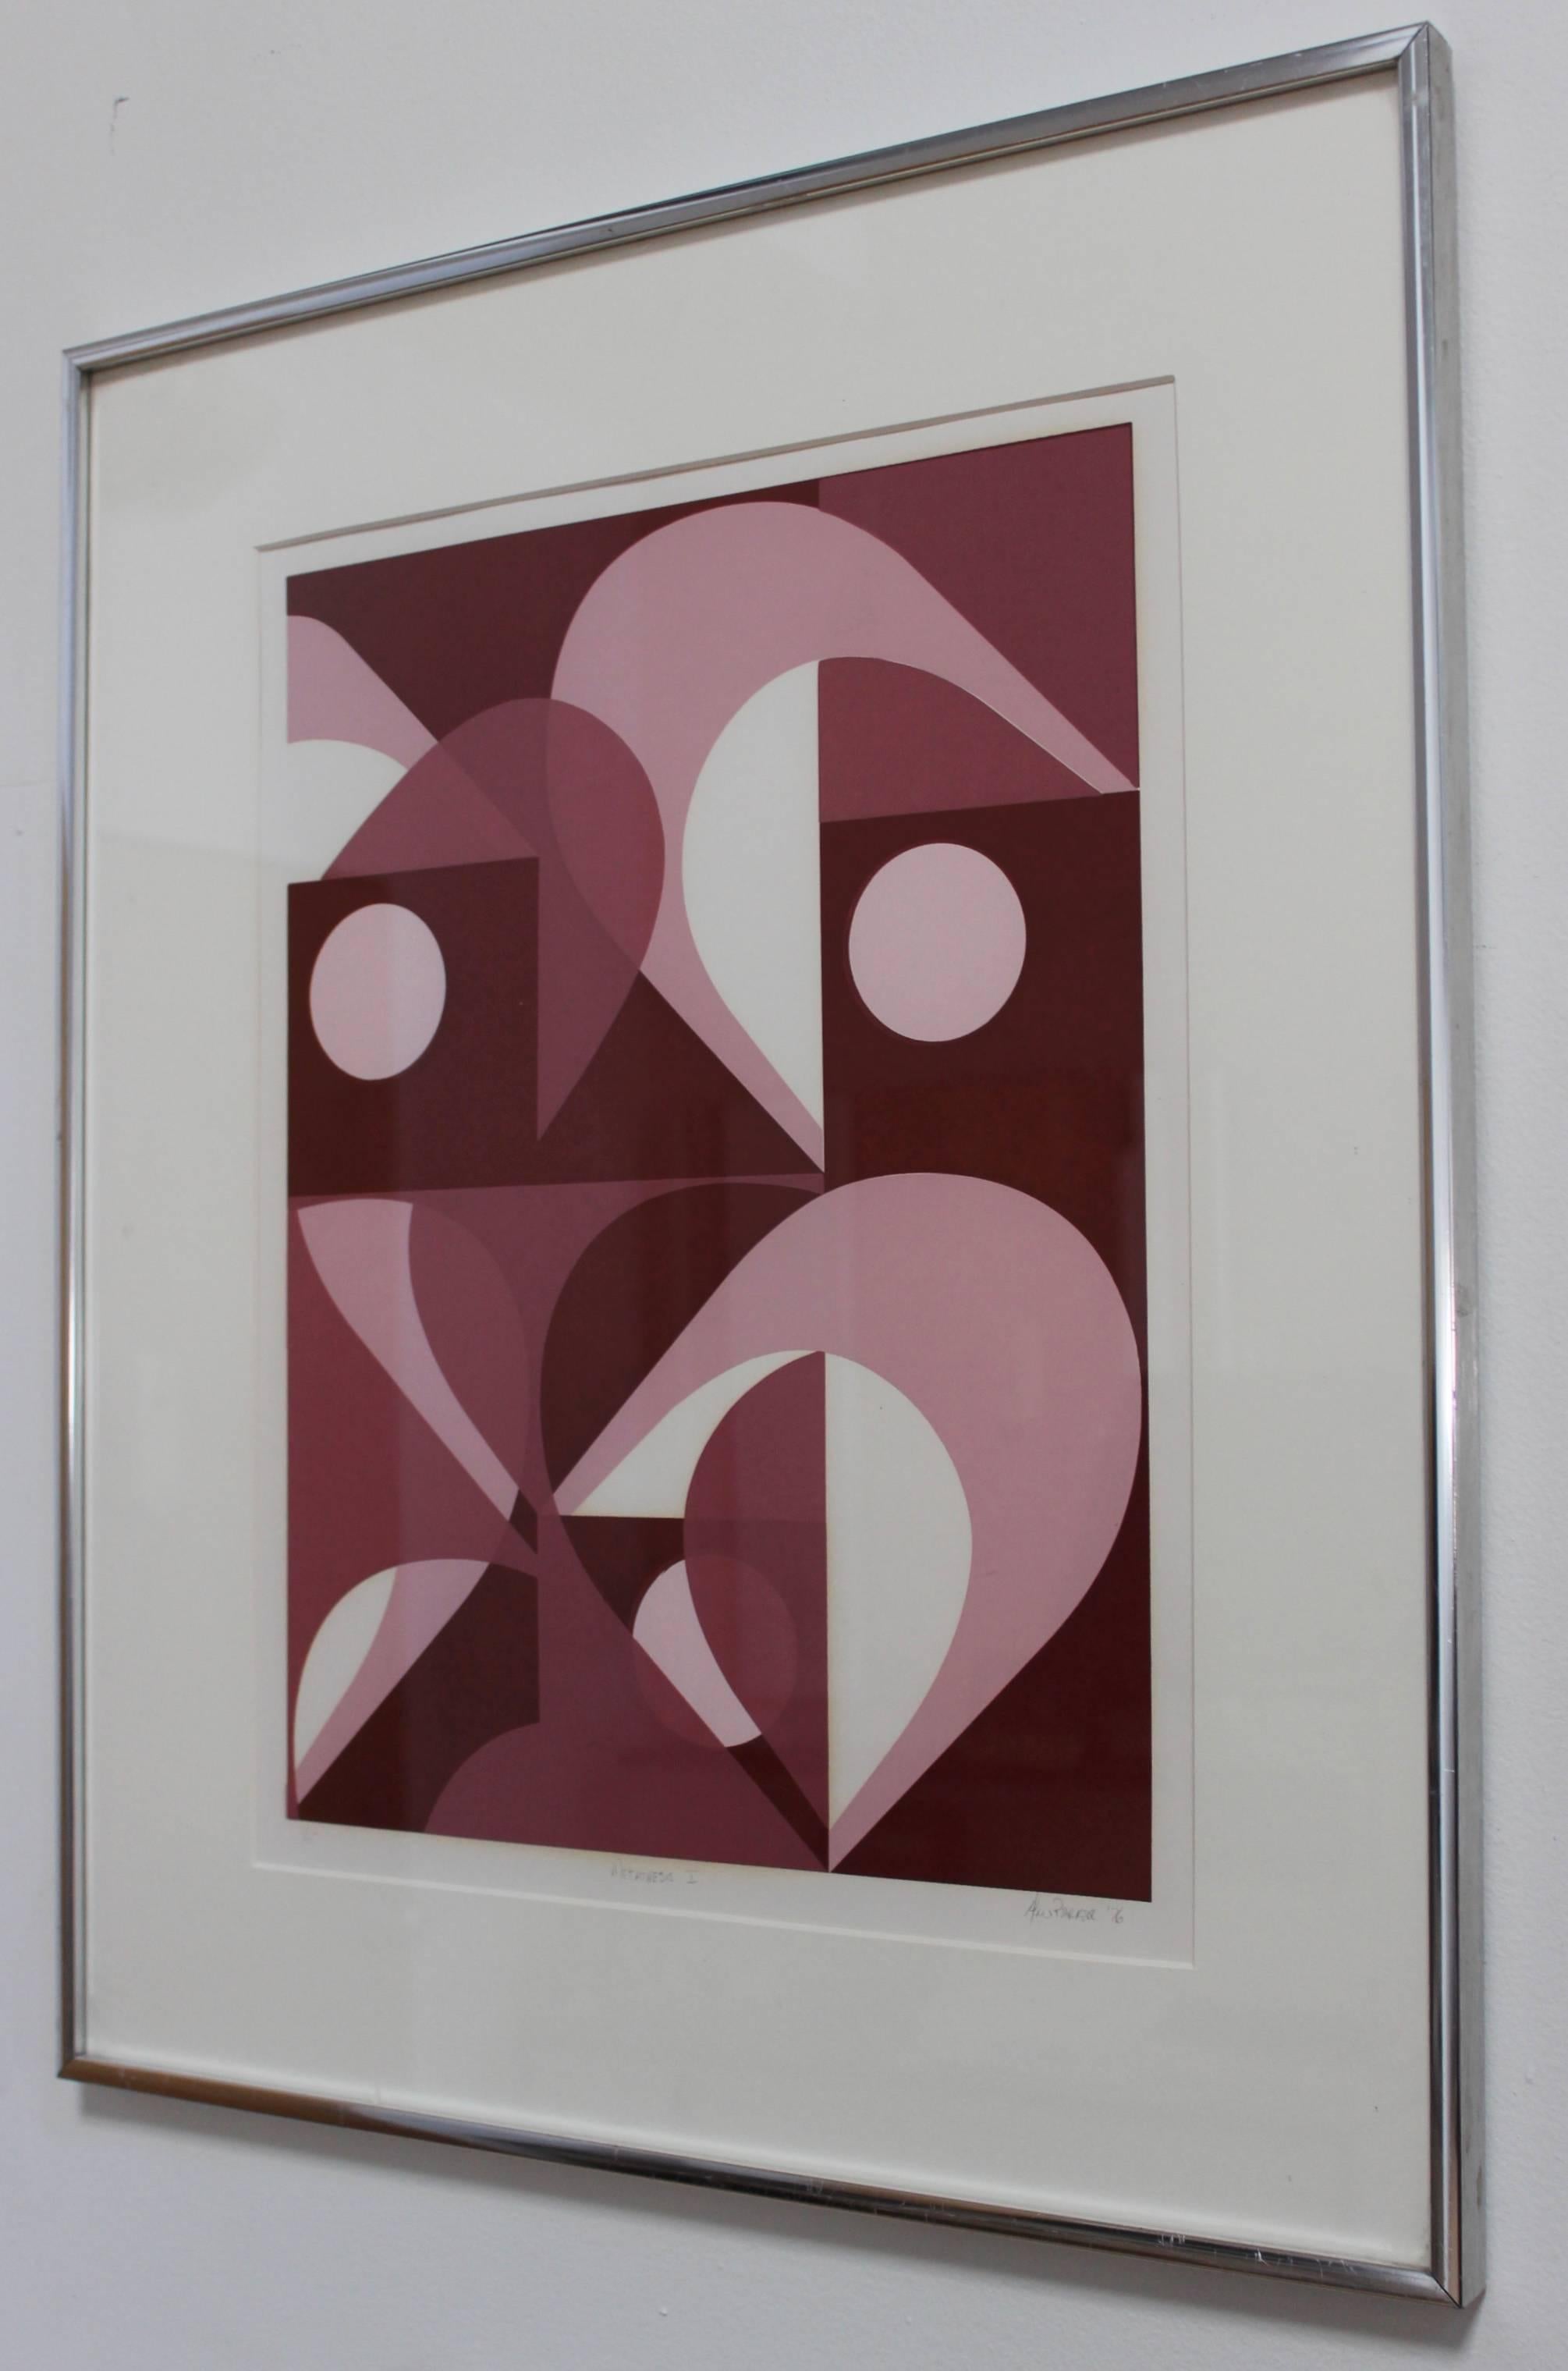 Artwork by Ann Parker, title Metathesis I 1976. Limited edition 1/15.

Artwork size without the frame width 12.75'' height 17''.